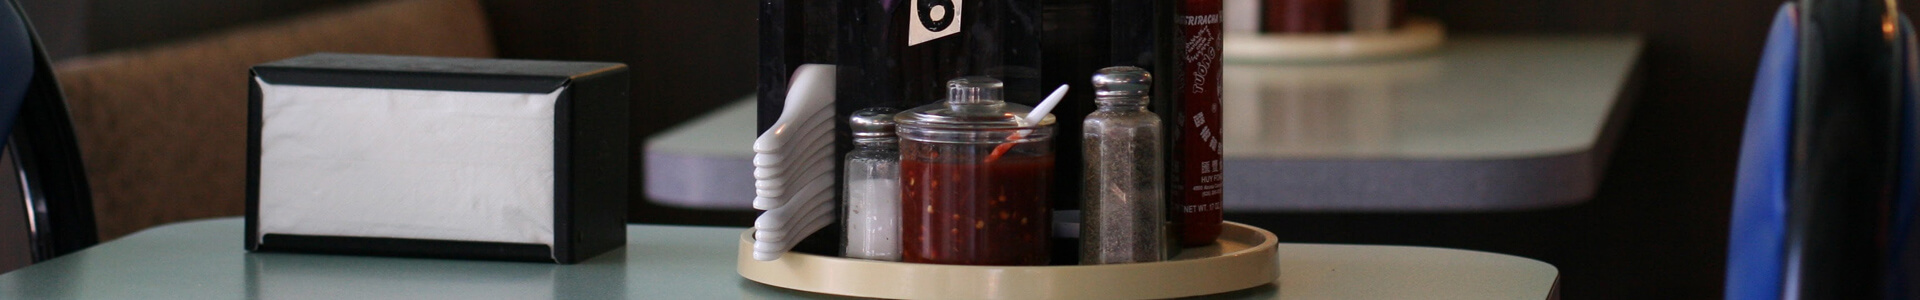 Spices and napkins in holders on a restaurant table.